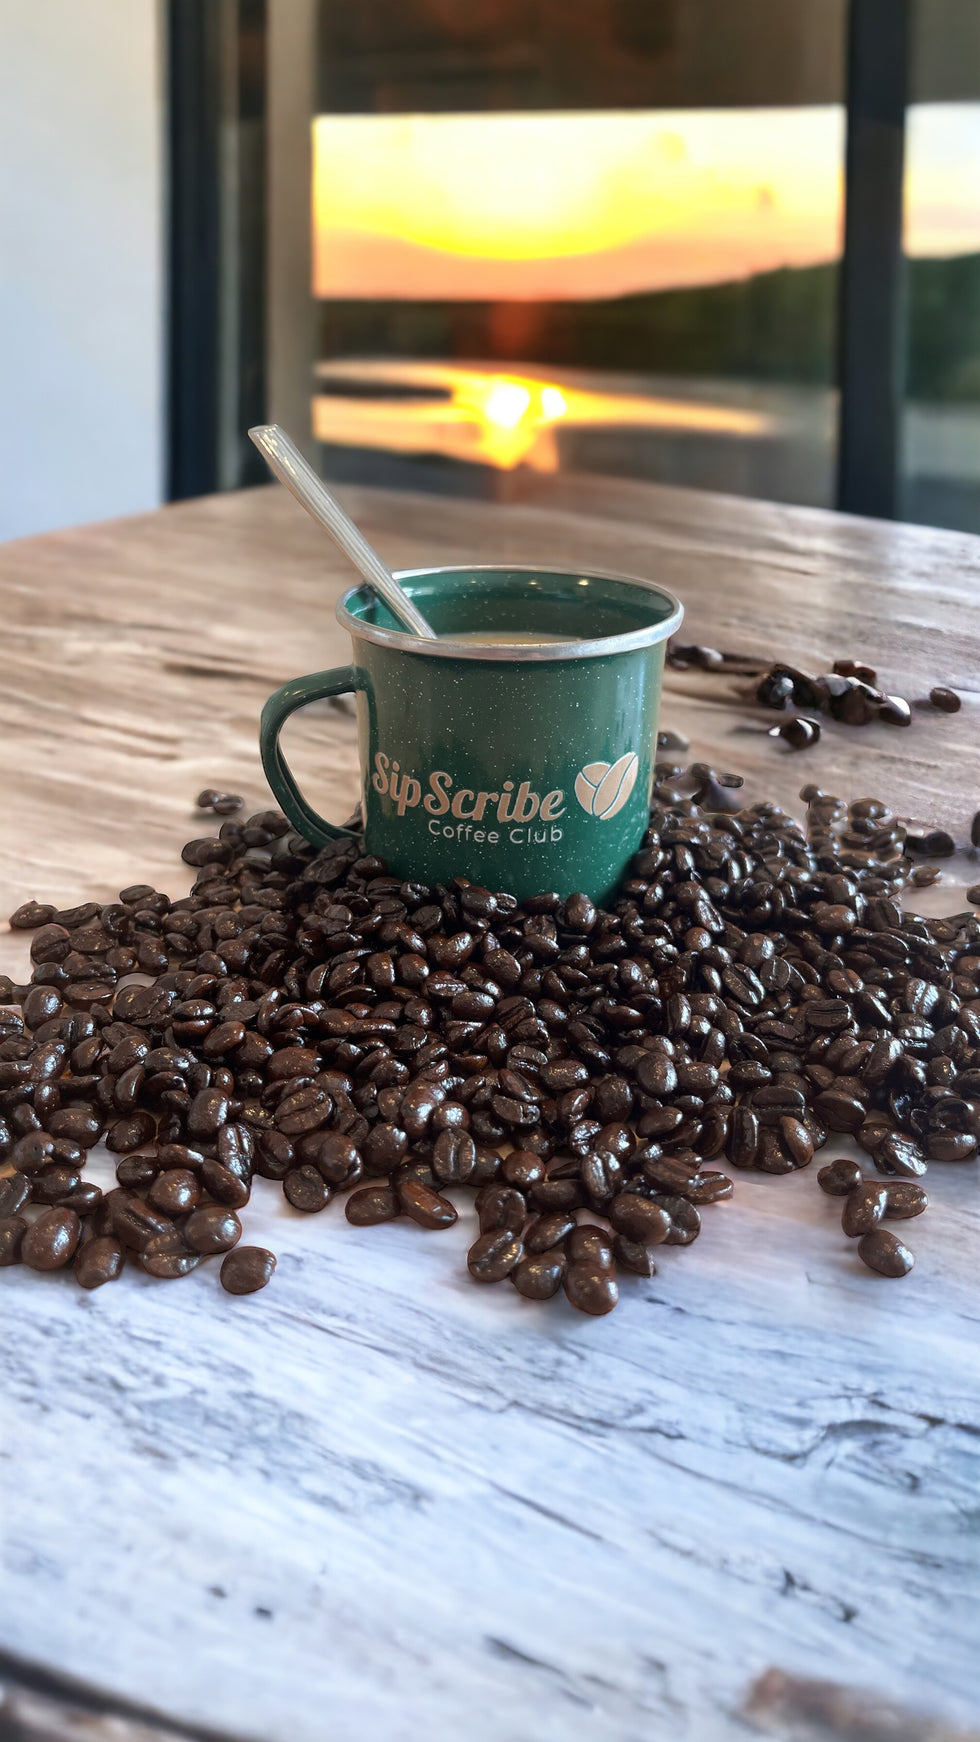 Green mug surrounded by coffee beans from SipScribe, a Coffee Subscription service in Canada